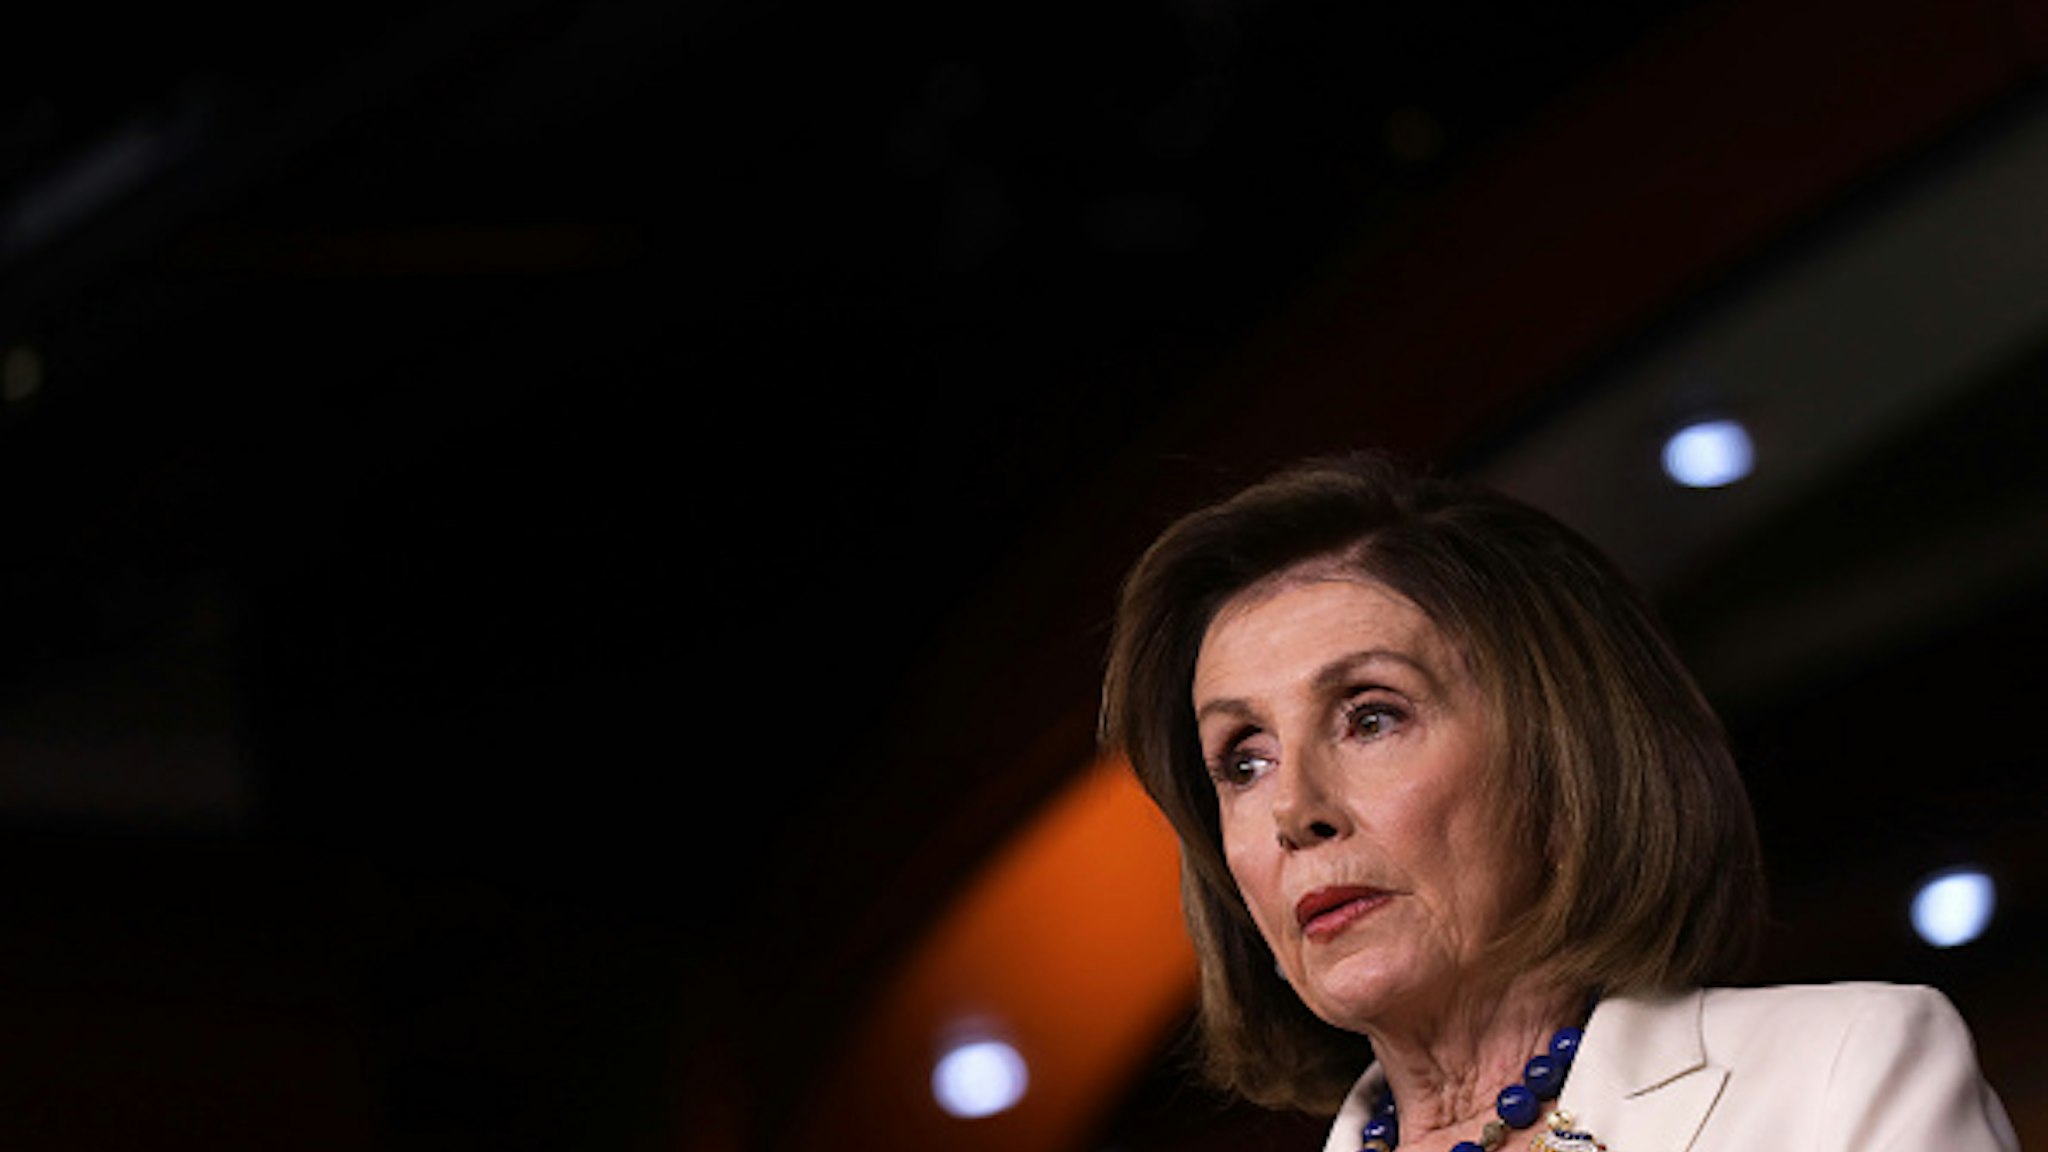 WASHINGTON, DC - DECEMBER 05: U.S. Speaker of the House Rep. Nancy Pelosi (D-CA) speaks during her weekly news conference December 5, 2019 on Capitol Hill in Washington, DC. Speaker Pelosi discussed the impeachment inquiry against President Donald Trump.